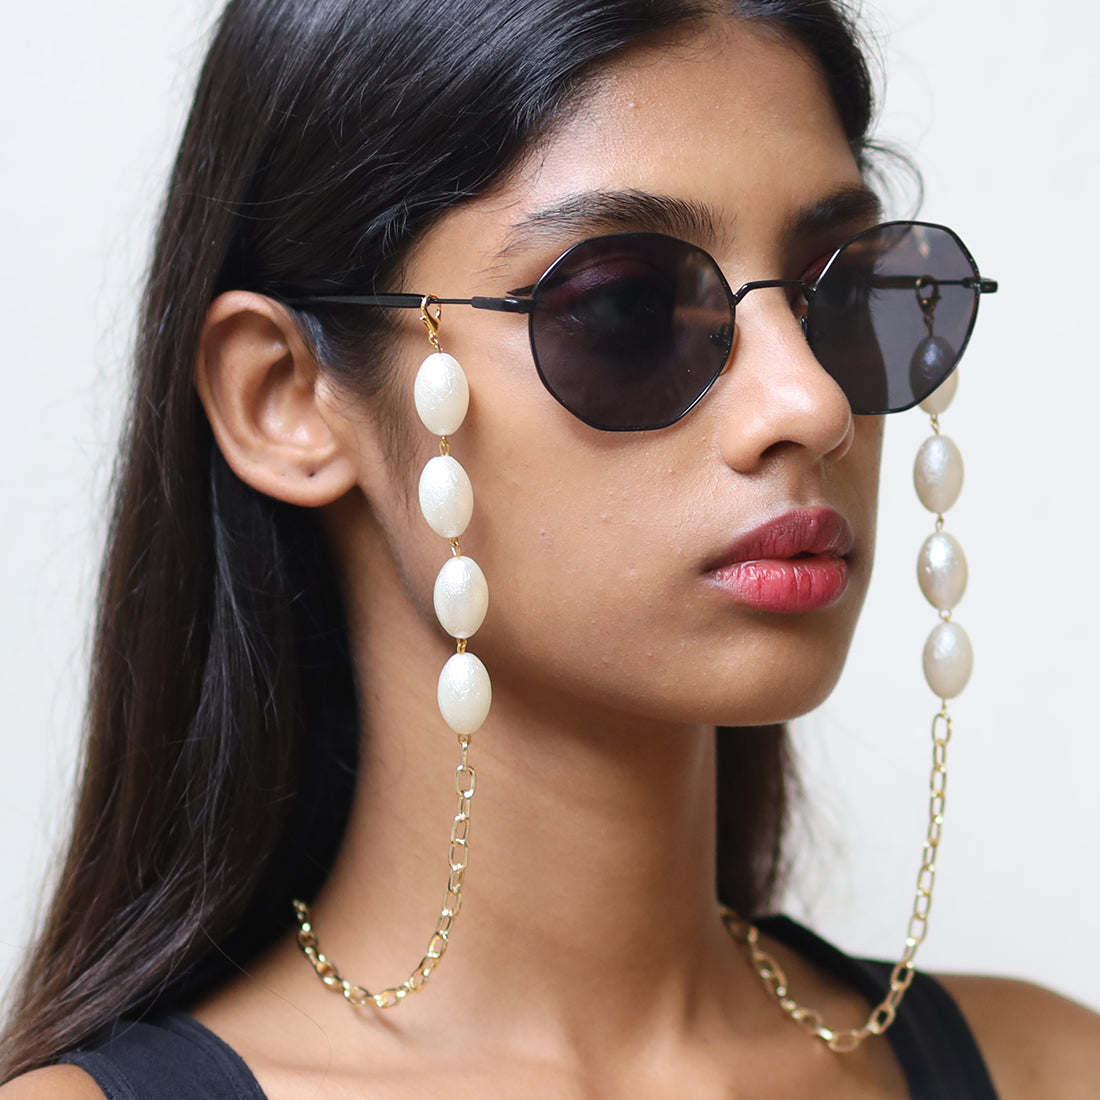 METALLIC GOLD-TONED CHAIN-LINK & WHITE BEADED MASK CHAIN OR SUNGLASS CHAIN